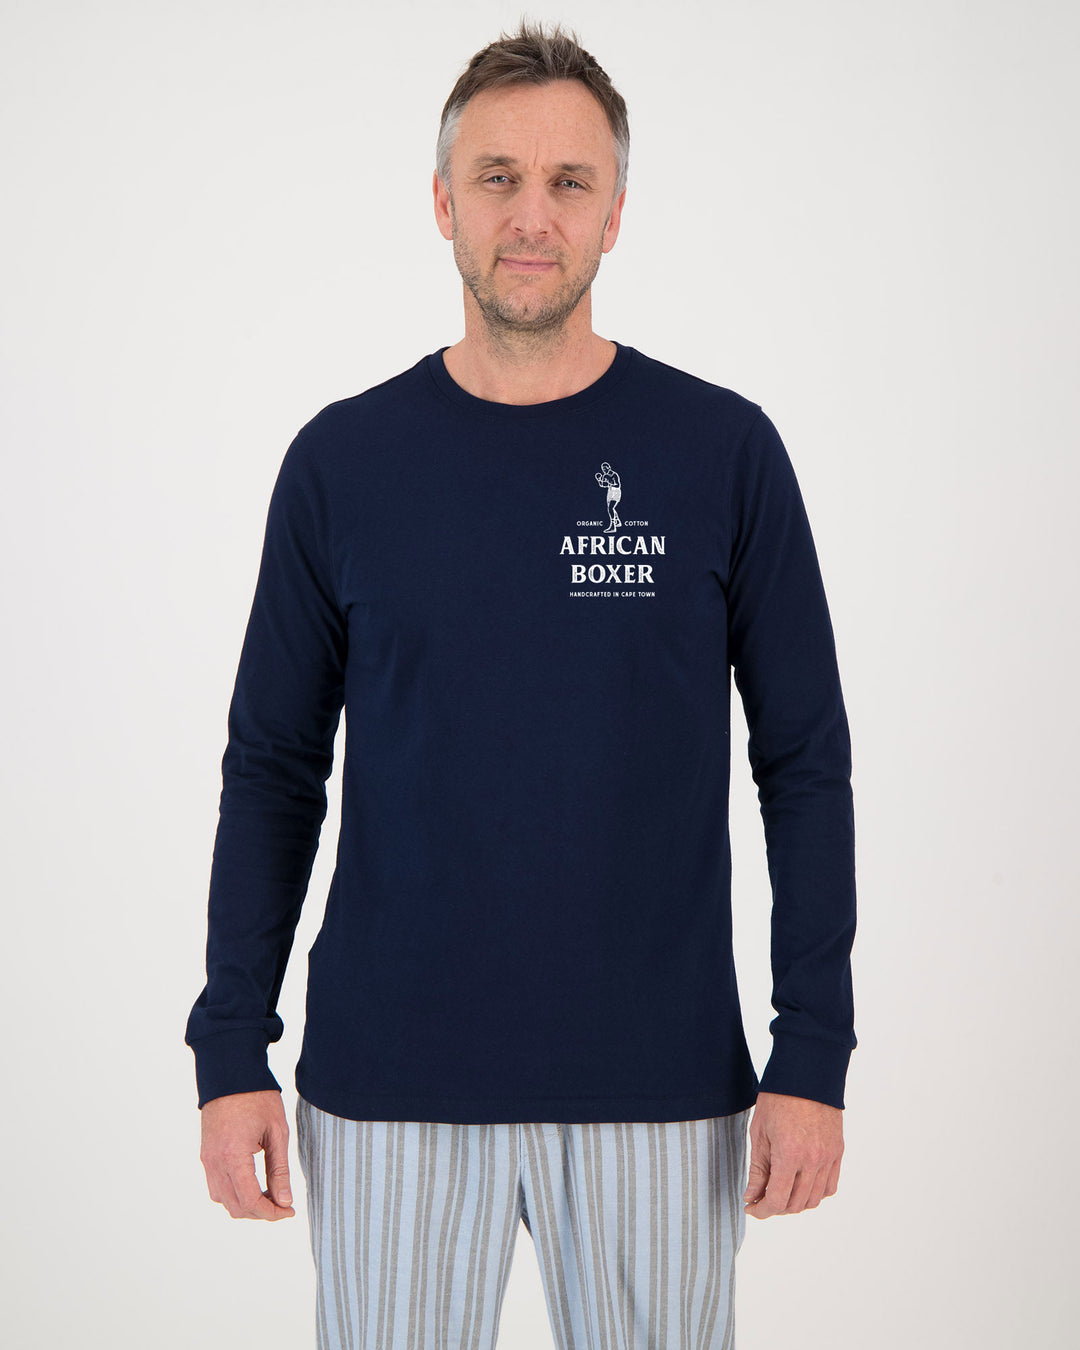 Mens Long Sleeve Navy T-Shirt African Boxer Front - Woodstock Laundry